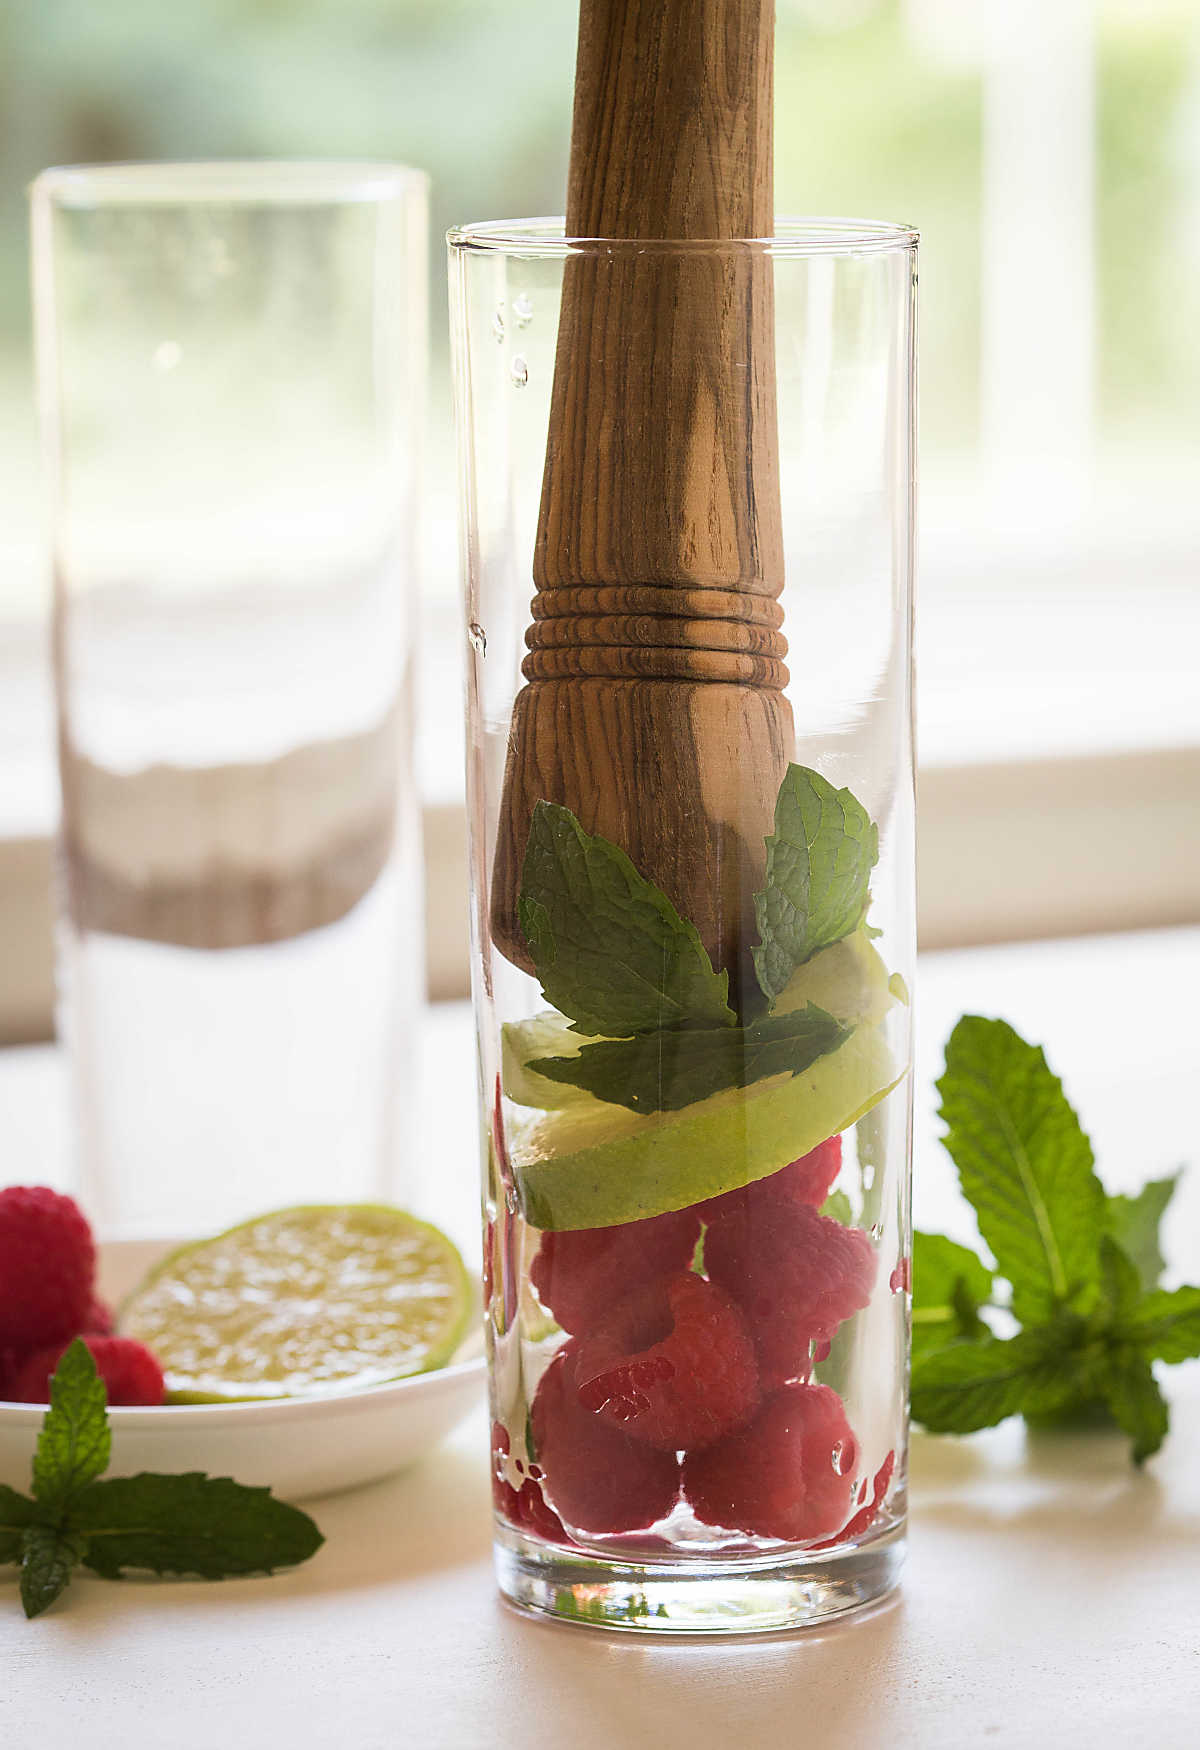 Fresh raspberries with lime slices and mint leaves in a glass with wooden muddler.